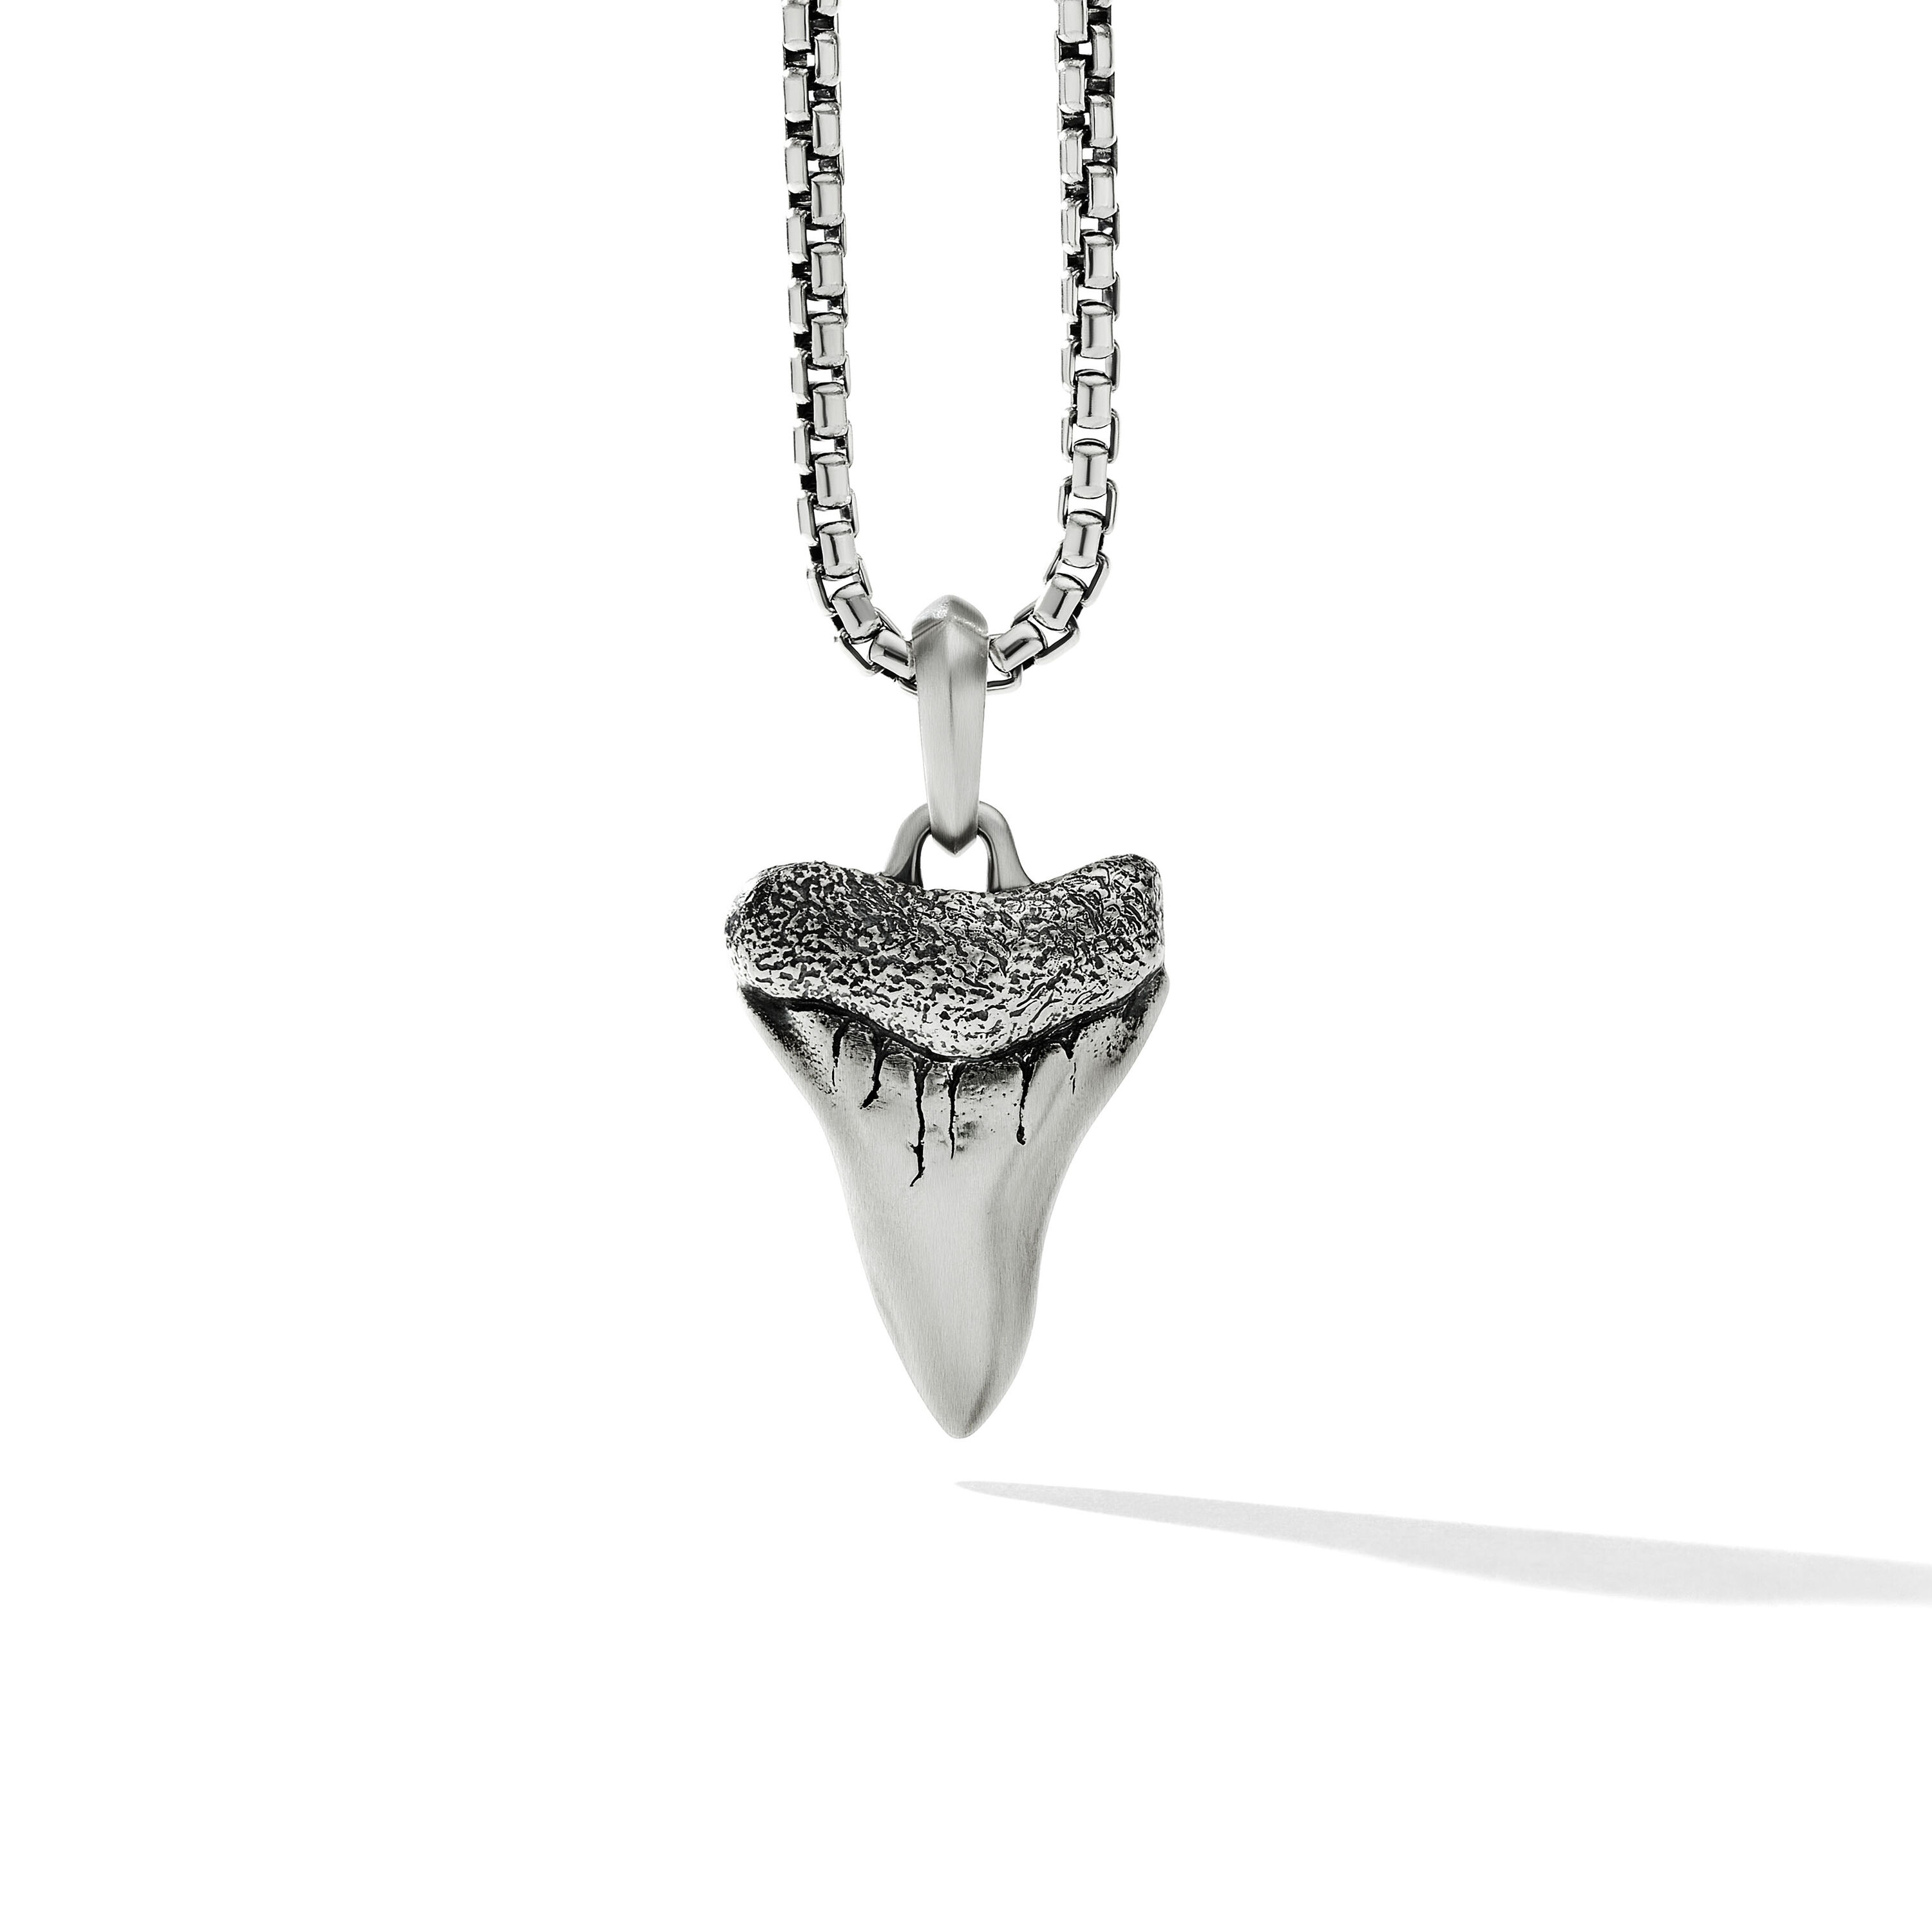 Shark Tooth Amulet in Sterling Silver, 27mm